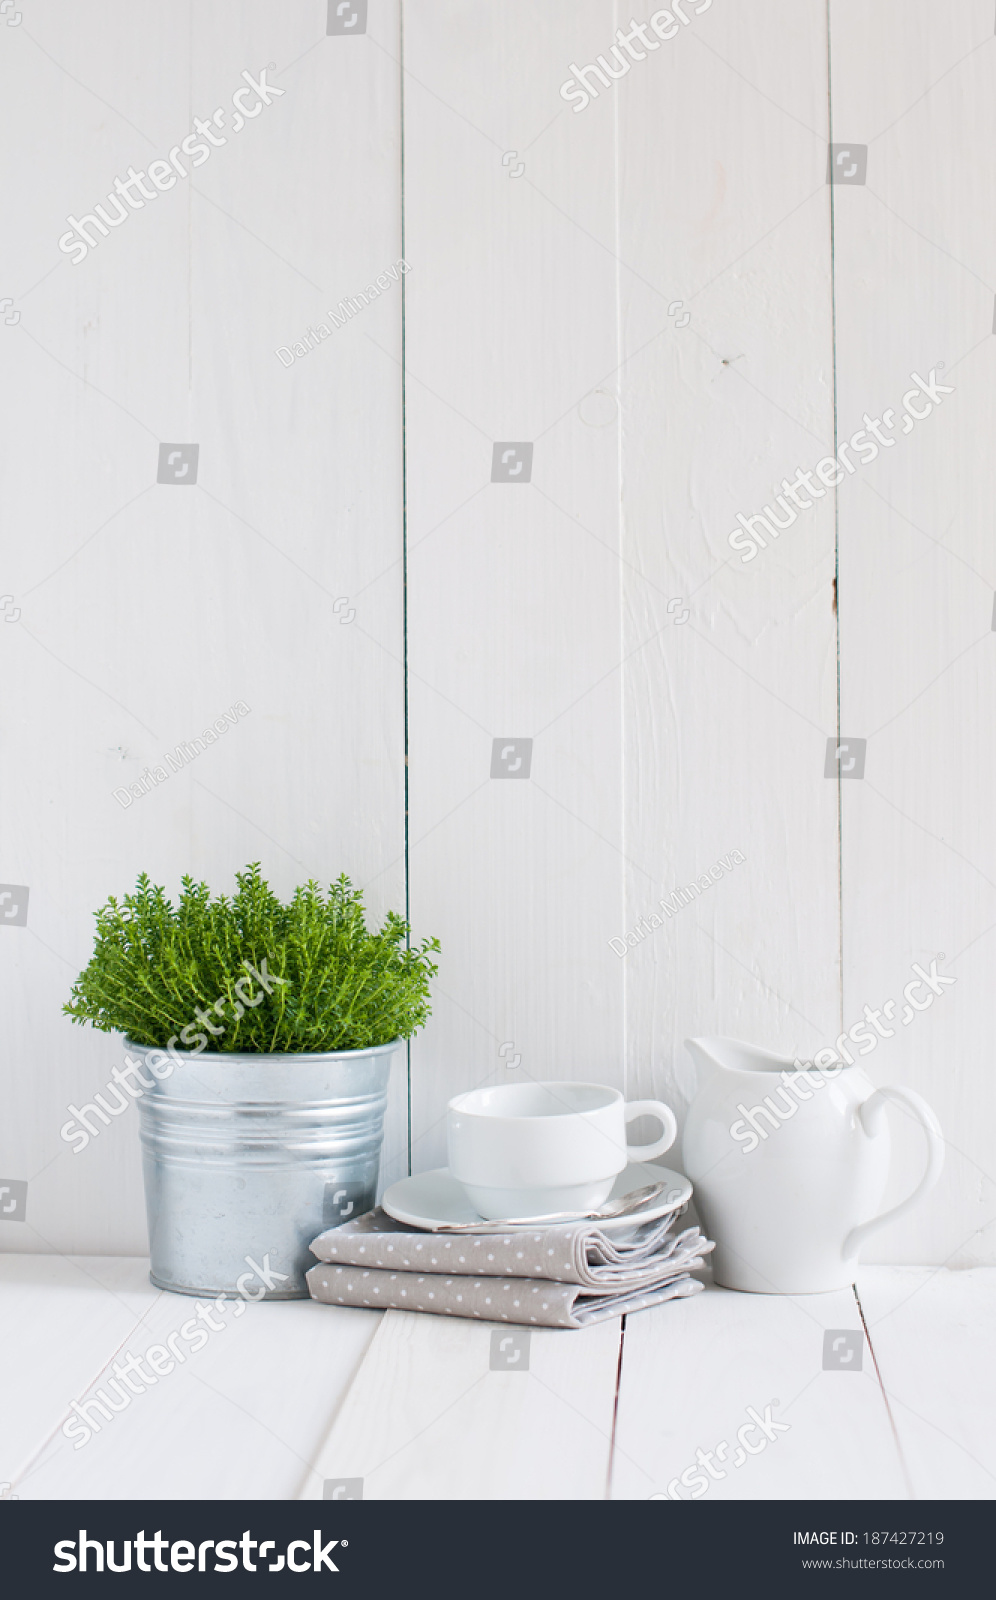 Cottage life, country kitchen decoration: a house plant in a metal pot, kitchen pottery, utensils and napkins on white painted board. Cozy home country life background is. #187427219